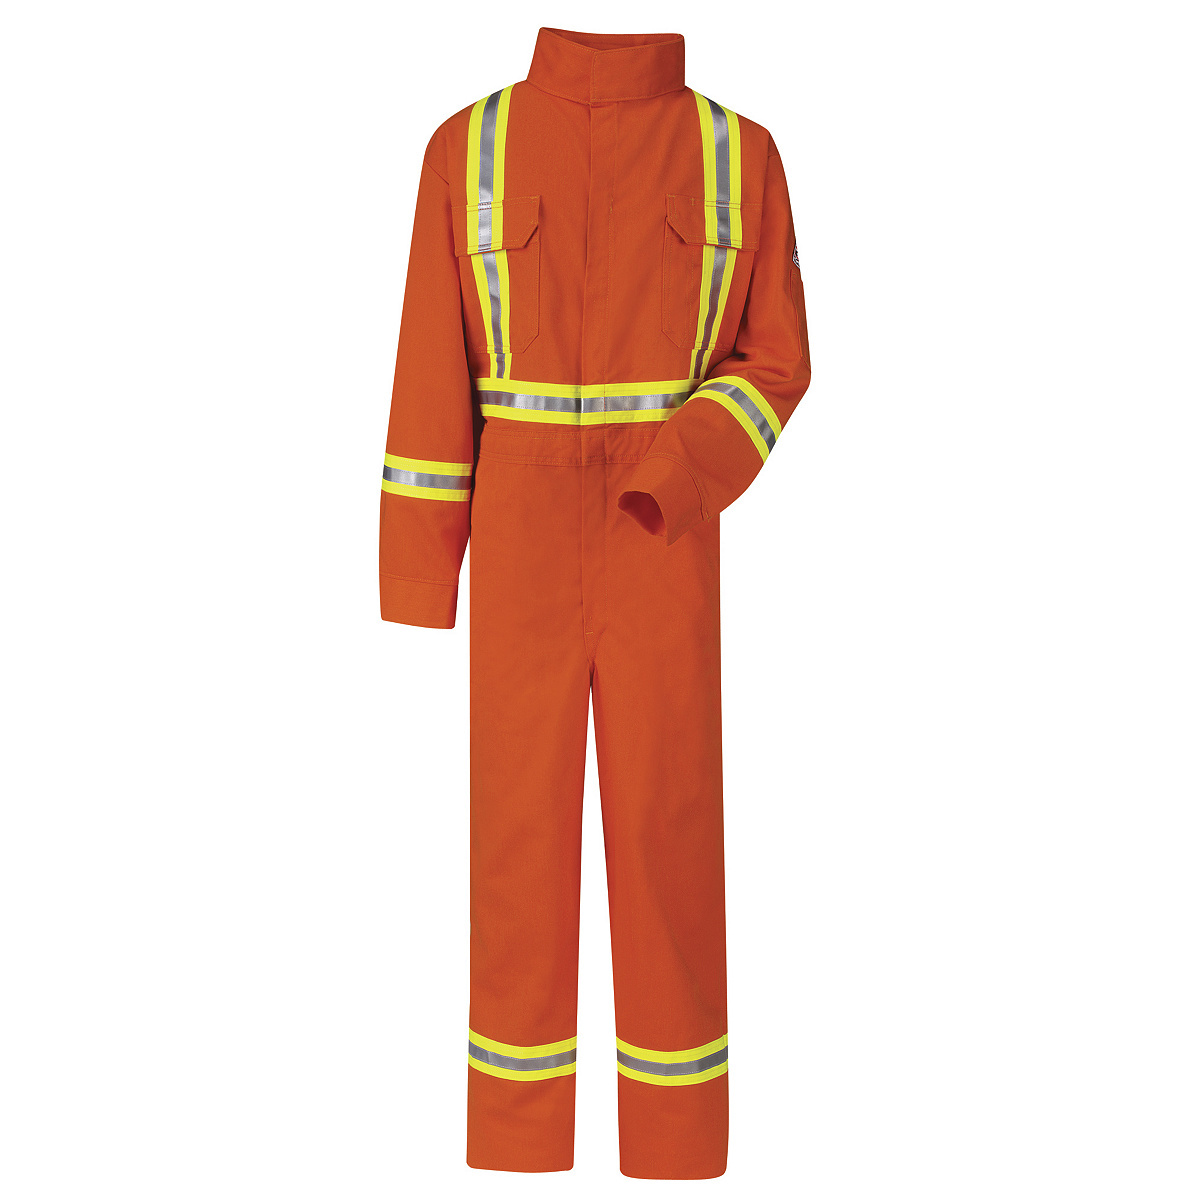 Bulwark® 44 Tall Orange Westex Ultrasoft® Twill/Cotton/Nylon Flame Resistant Coveralls With Zipper Front Closure And Reflective